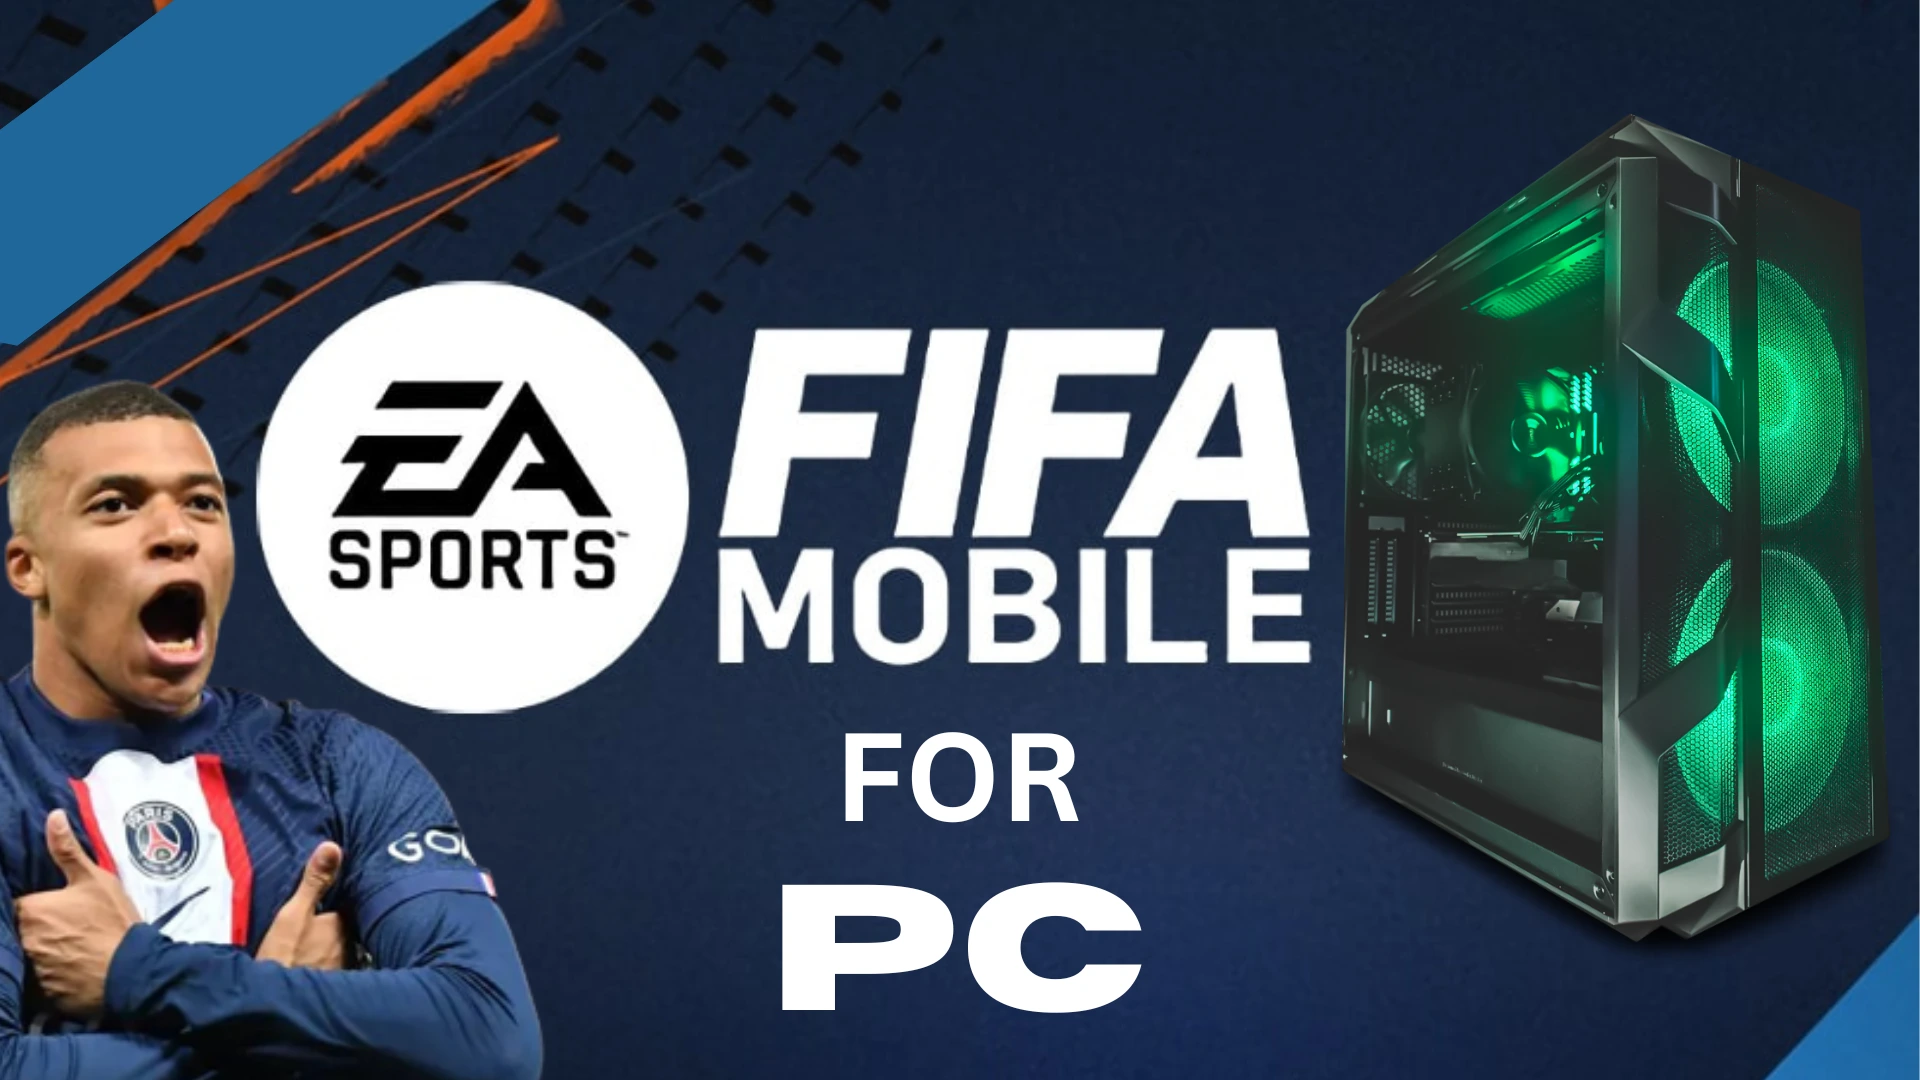 How to Play and Download FIFA Mobile PC